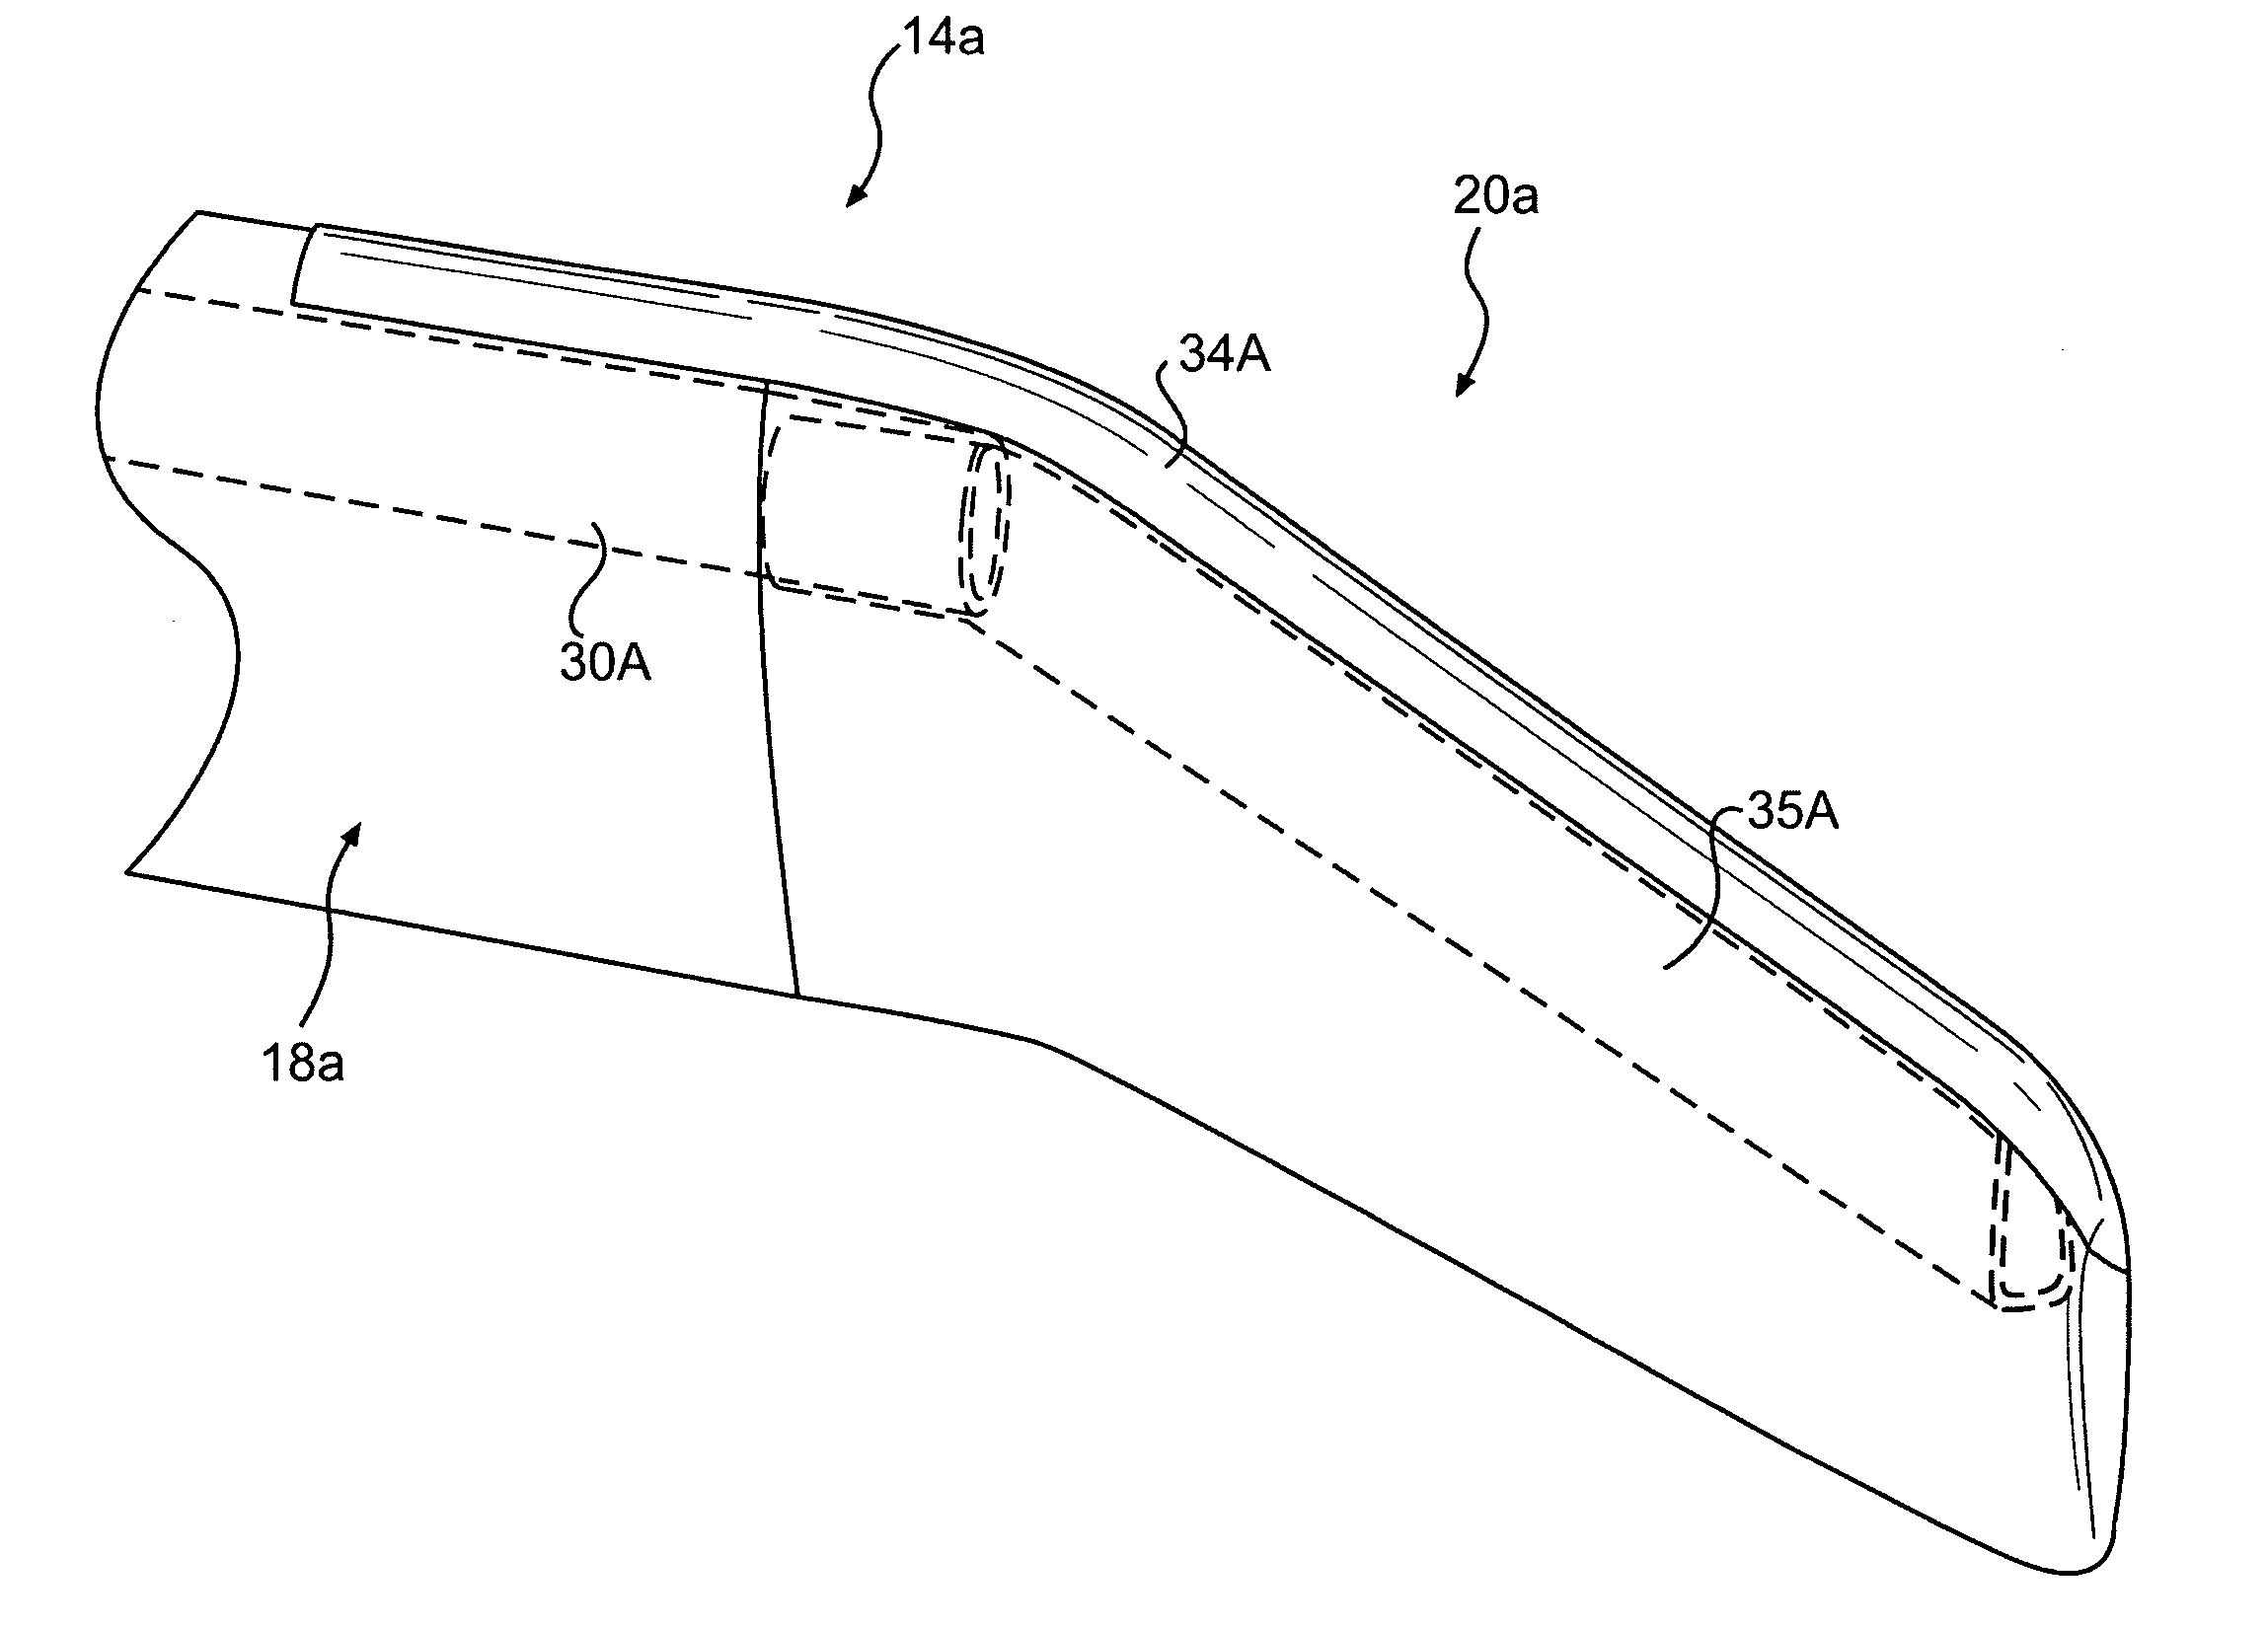 Rotor blade tip section